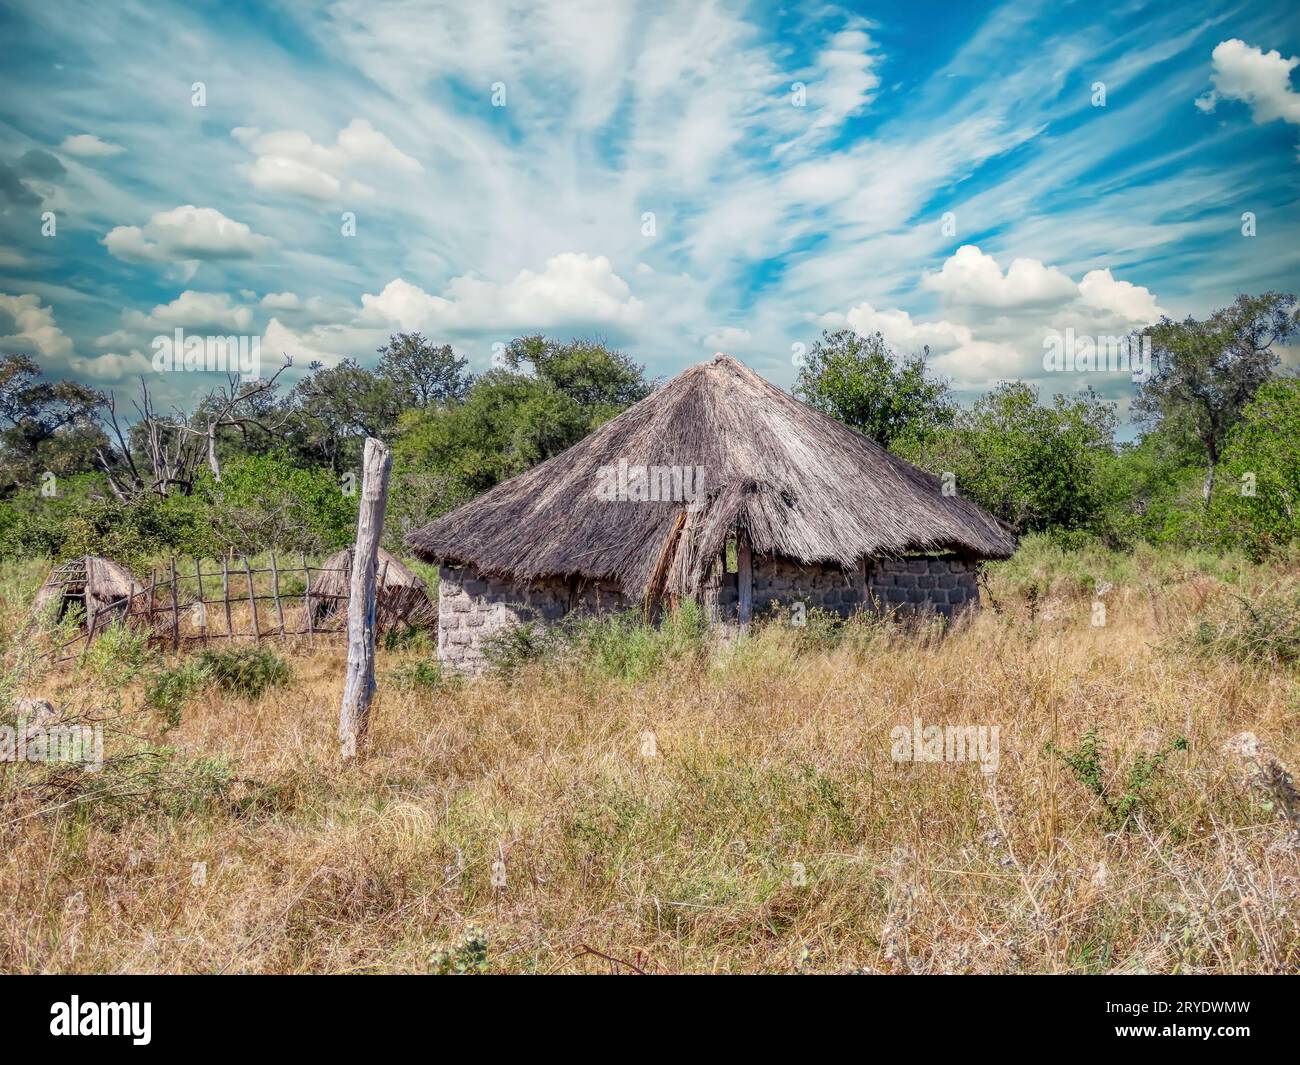 rondavel in the african bush in a ruined state, empty and dilapidated for a long time, daytime Stock Photo